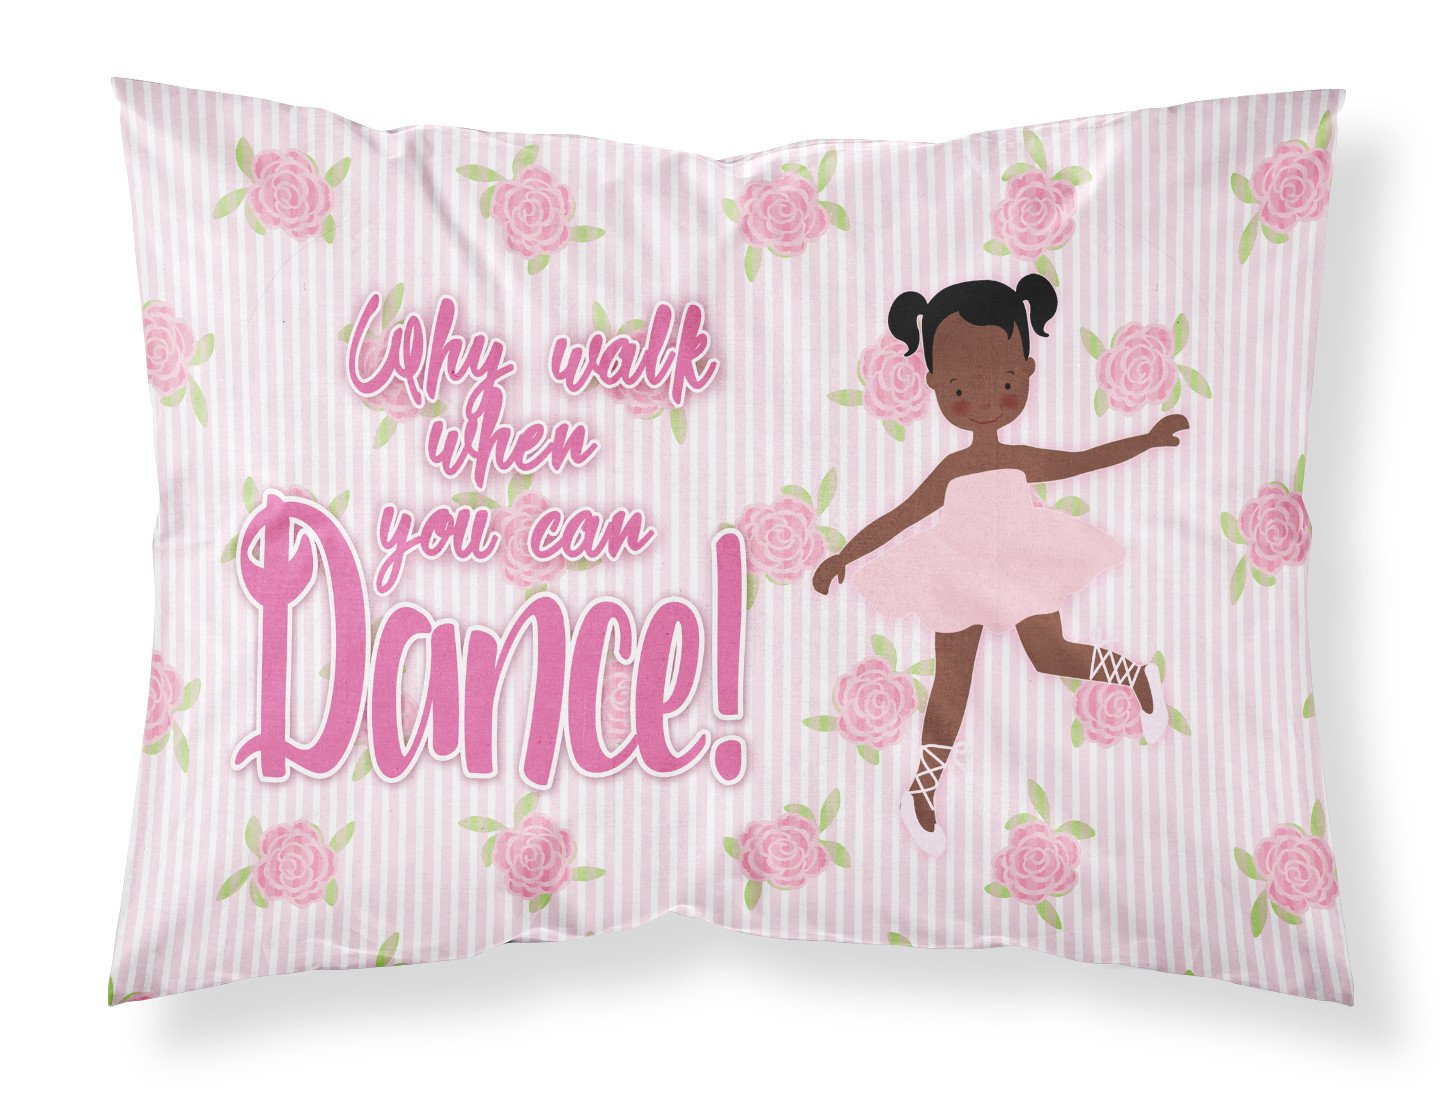 Ballet African American Pigtails Fabric Standard Pillowcase BB5382PILLOWCASE by Caroline's Treasures